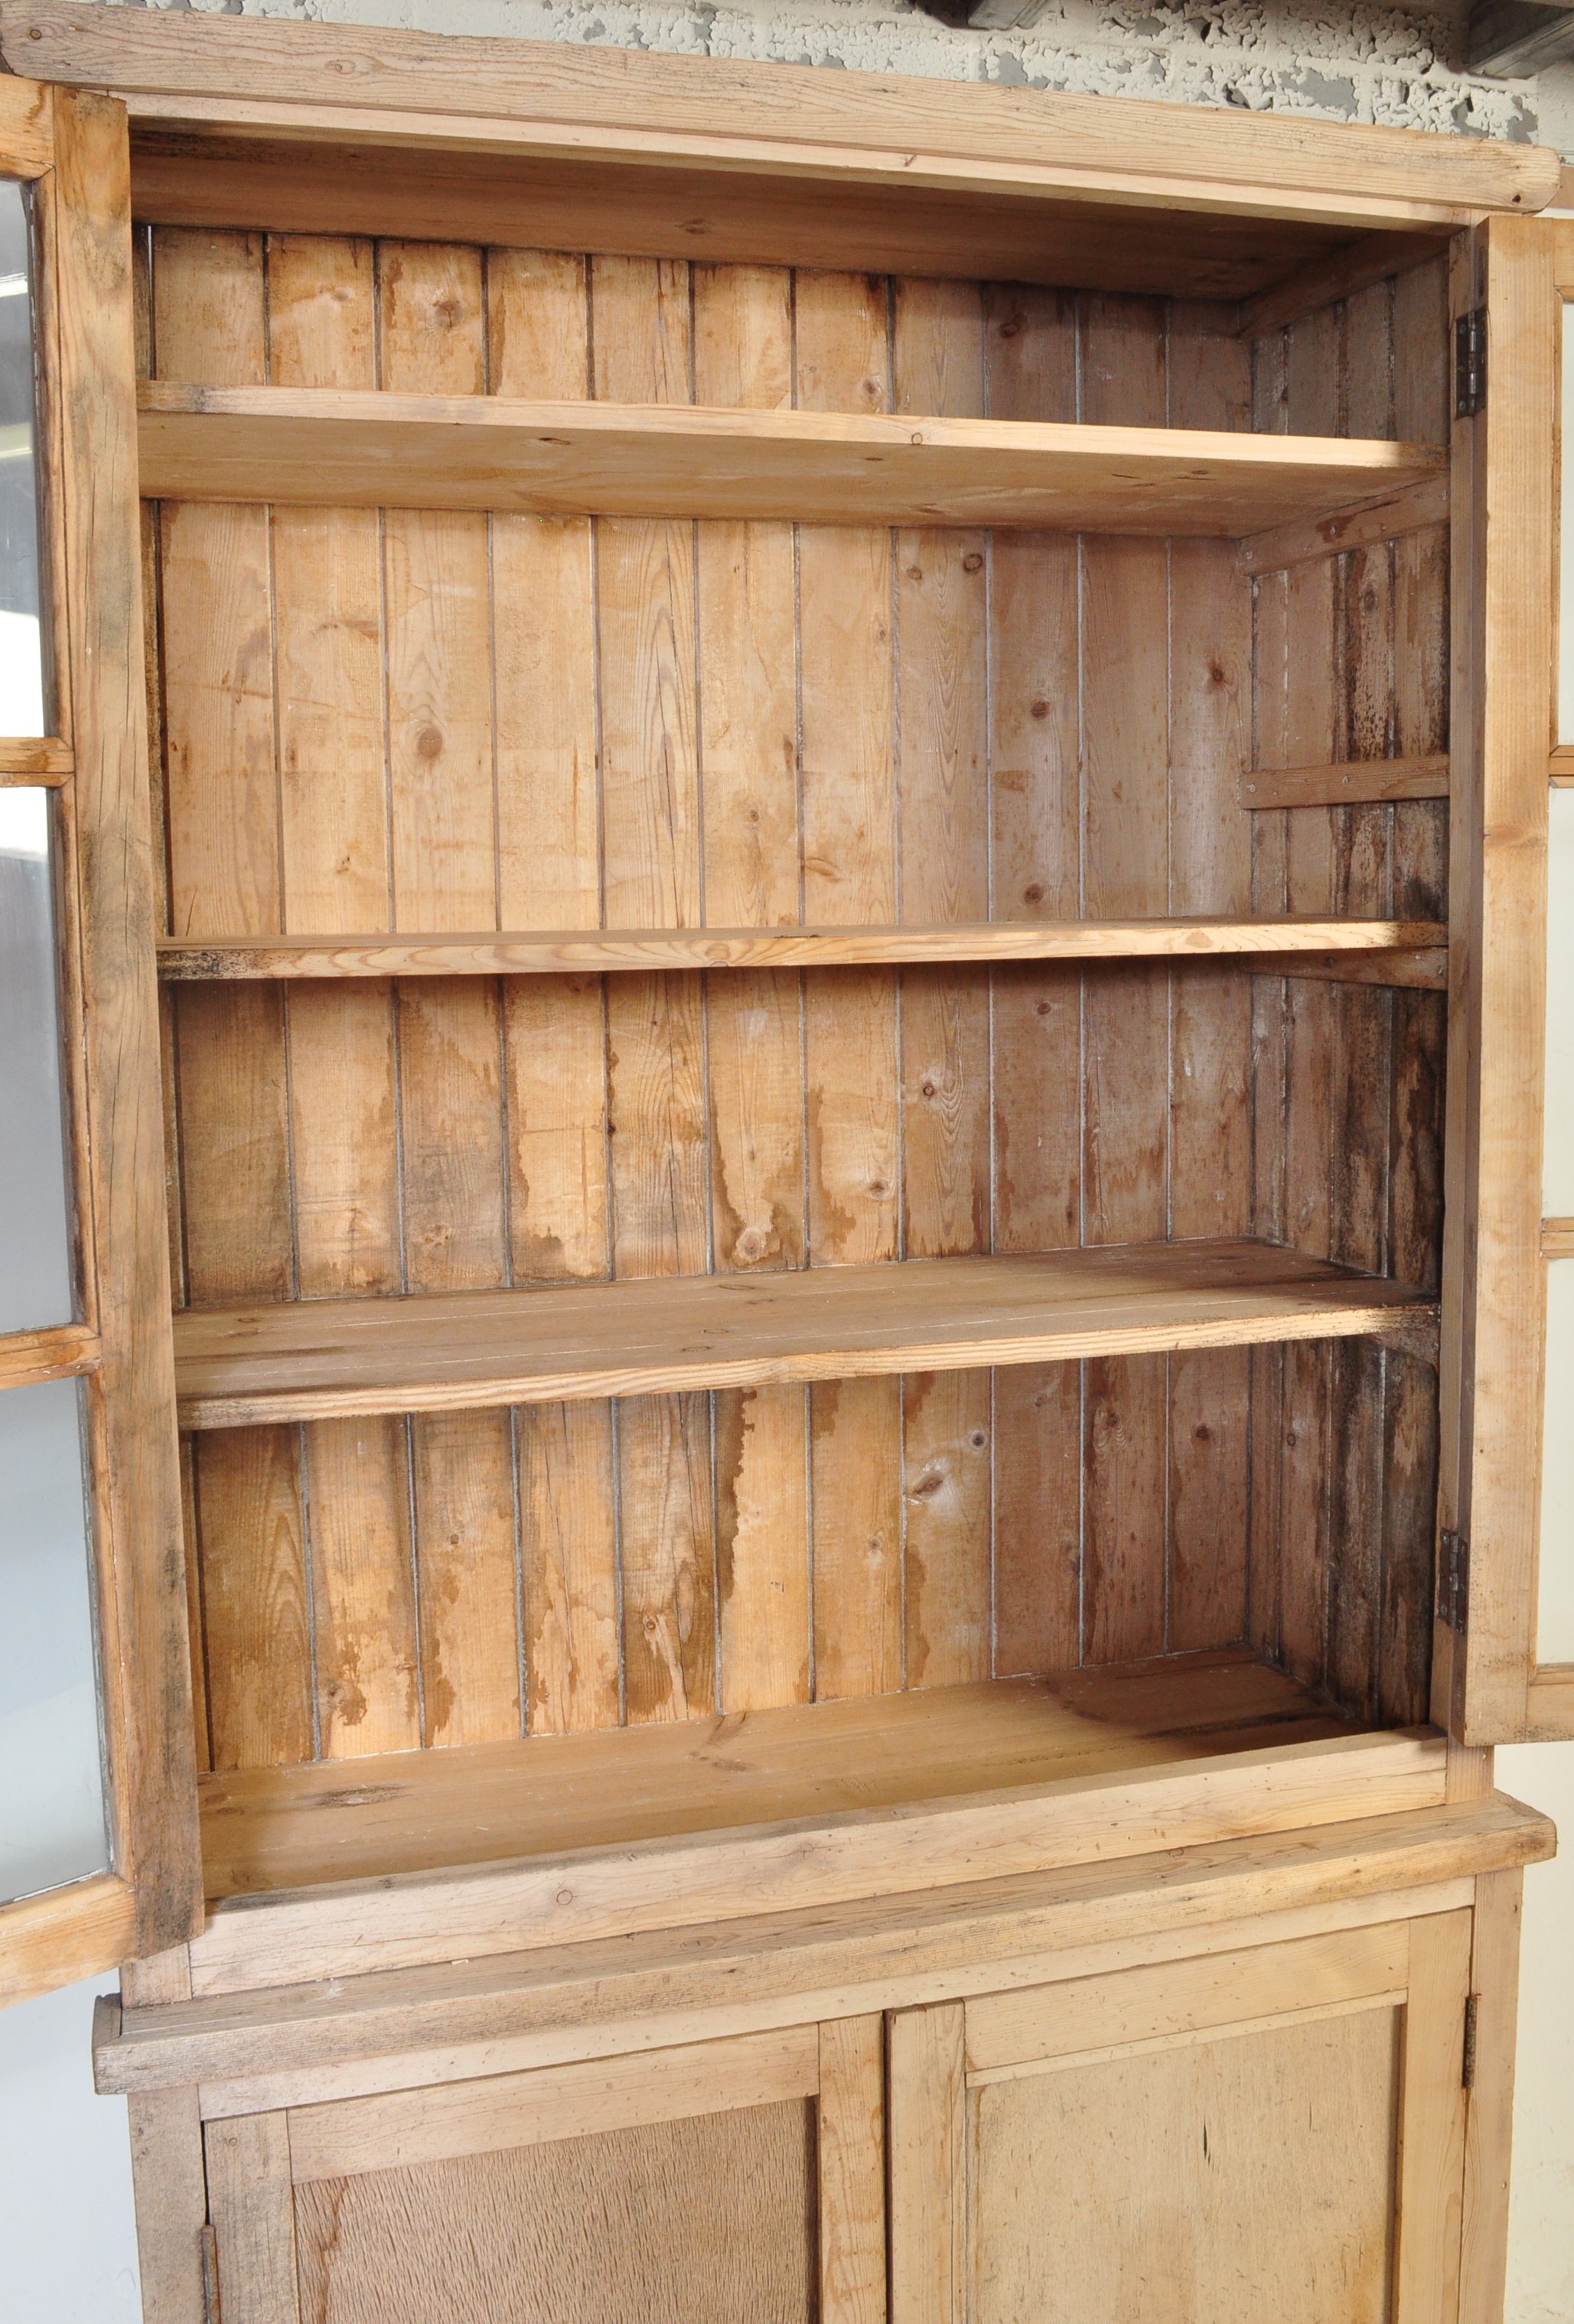 VINTAGE COUNTRY PINE FARMHOUSE DRESSER CABINET - Image 3 of 8